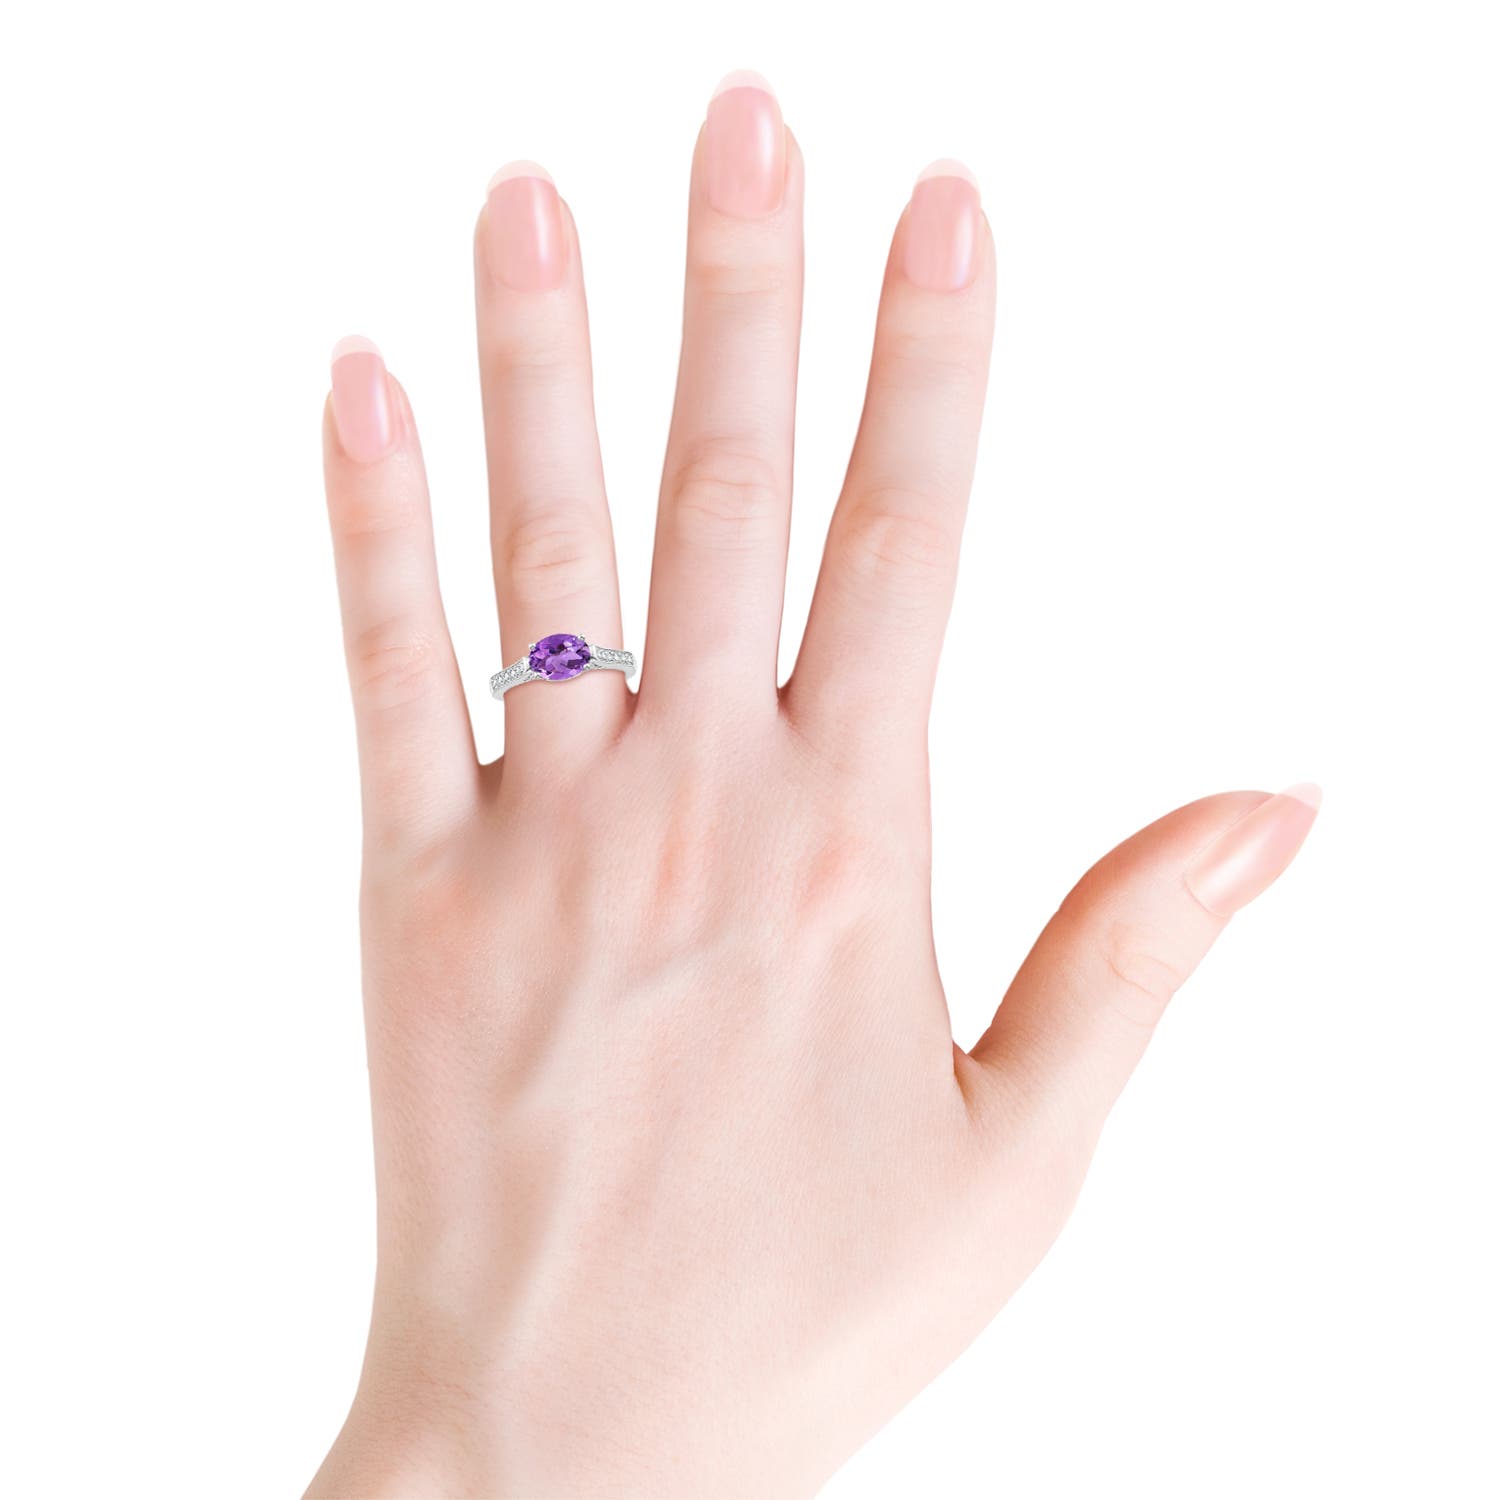 AA - Amethyst / 1.29 CT / 14 KT White Gold